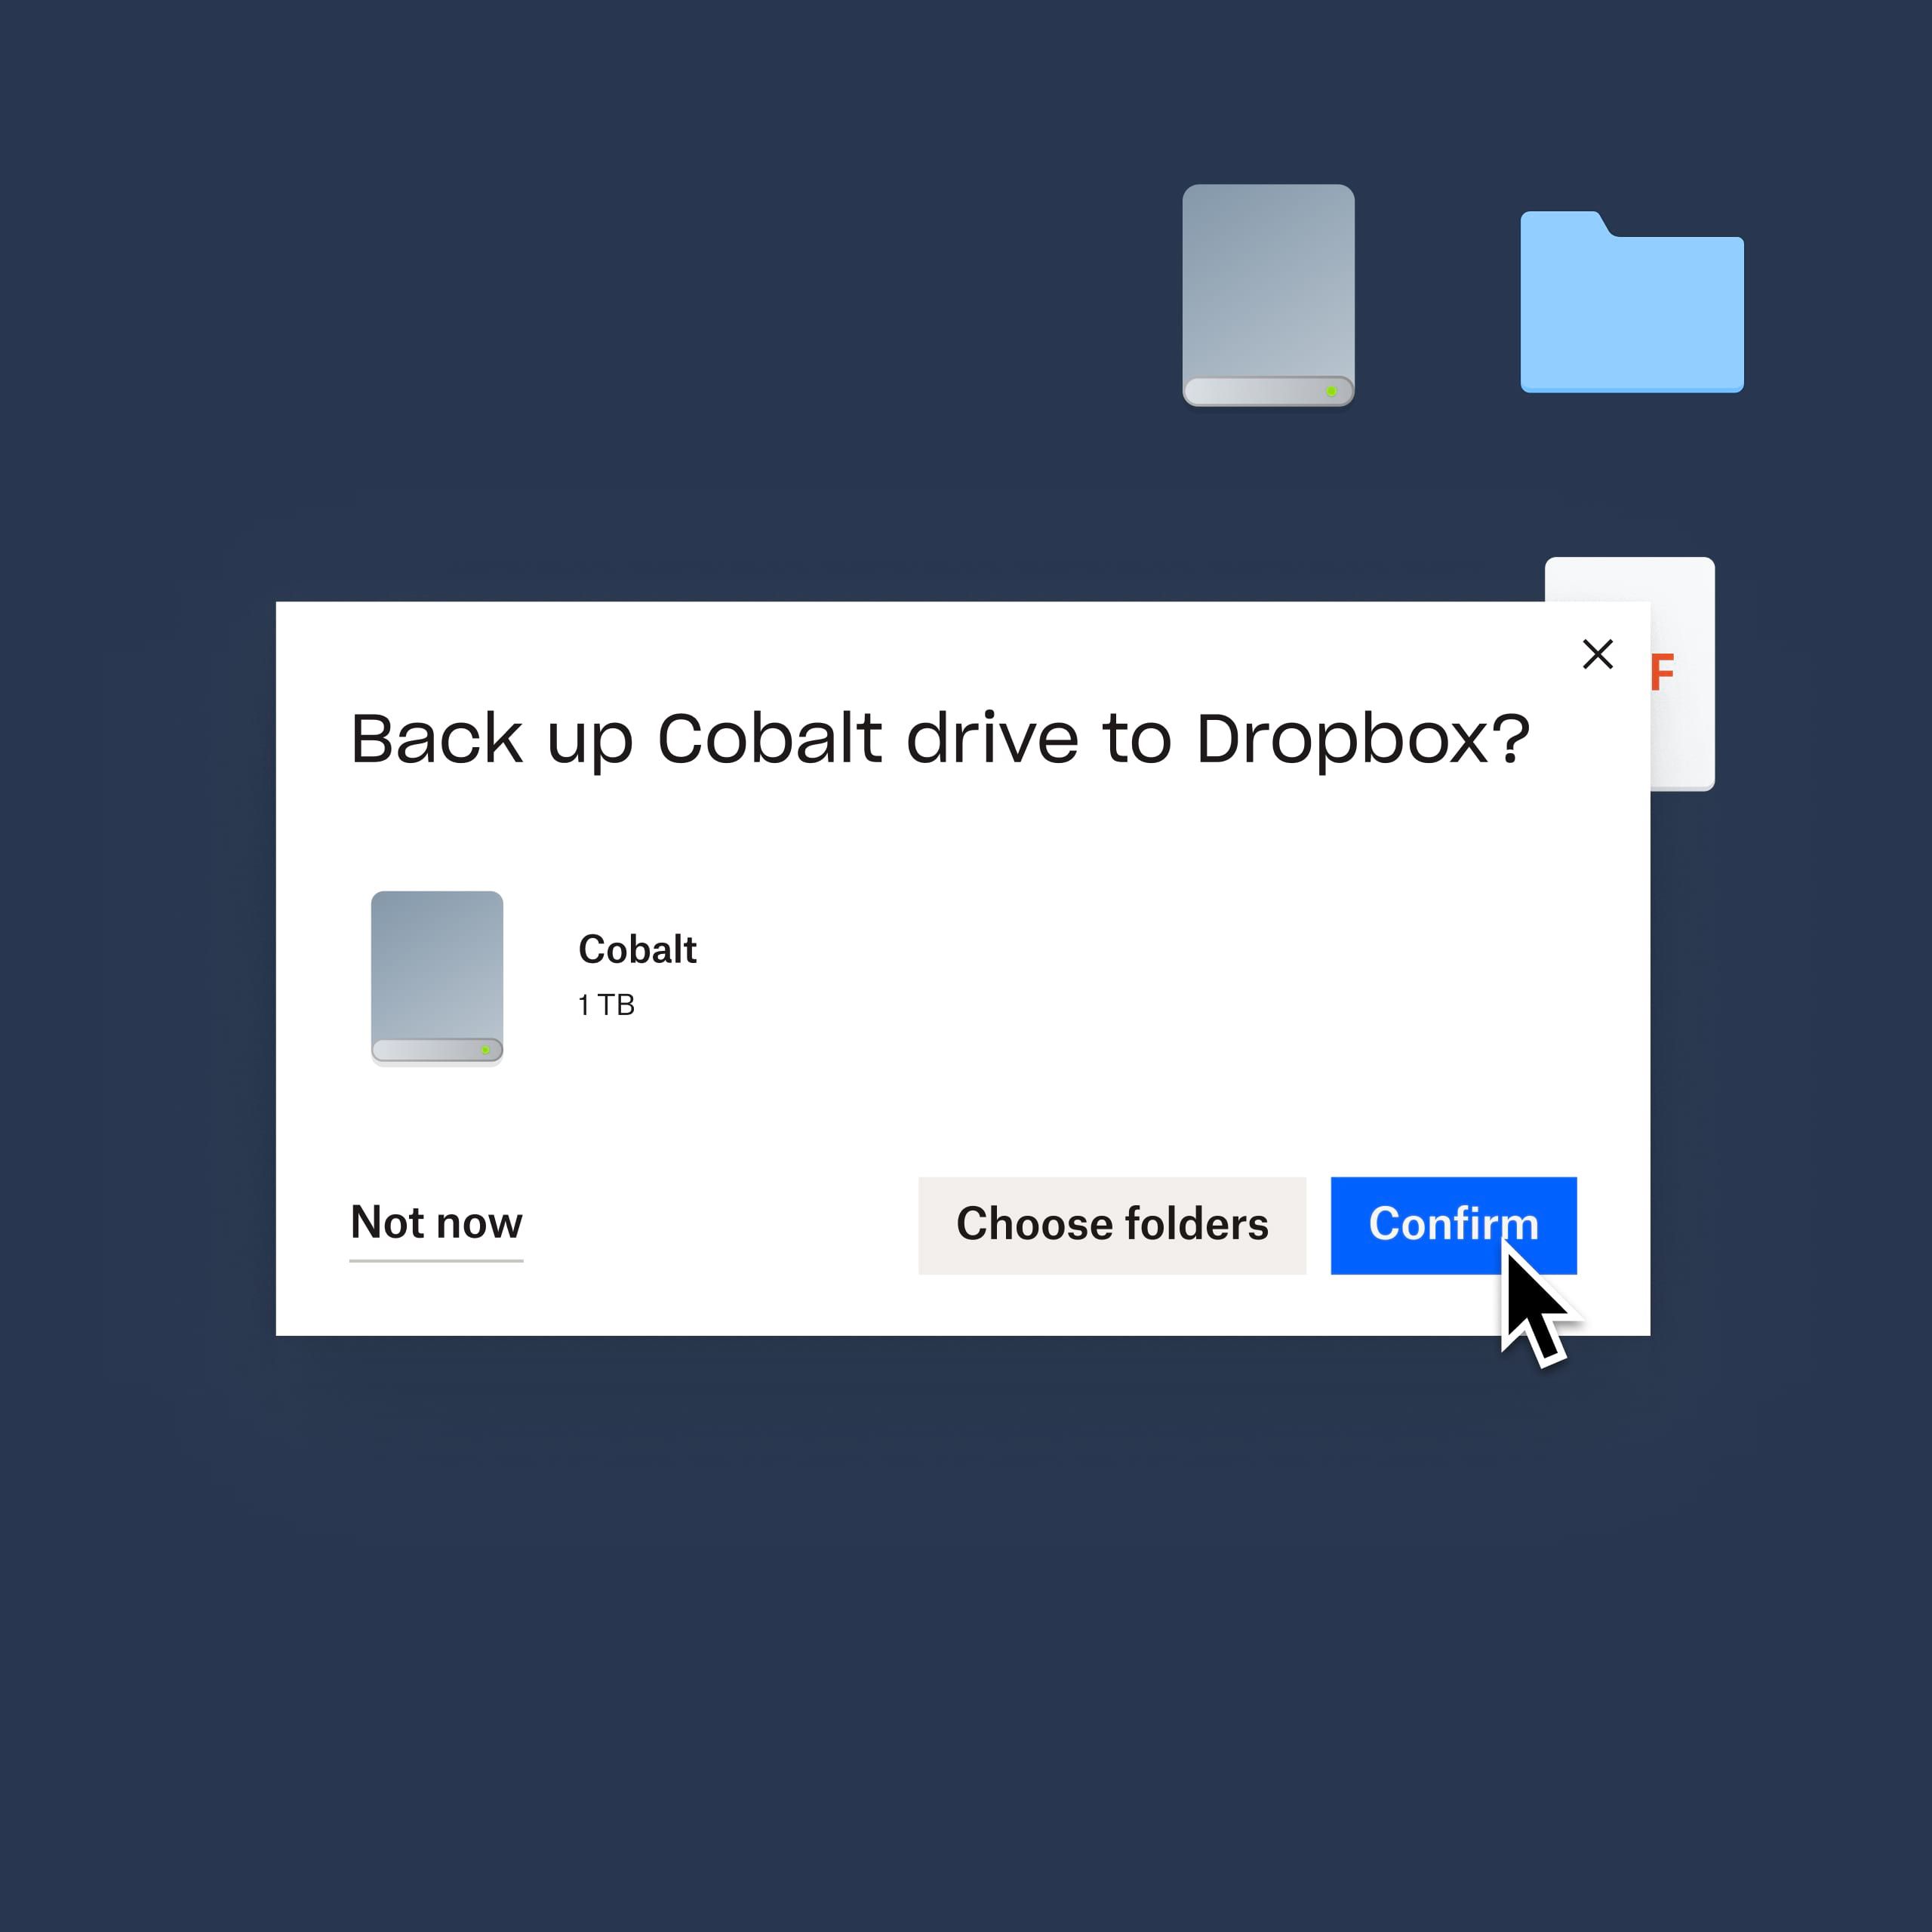 A user clicking on a blue “confirm” button that to back up their Cobalt drive to Dropbox